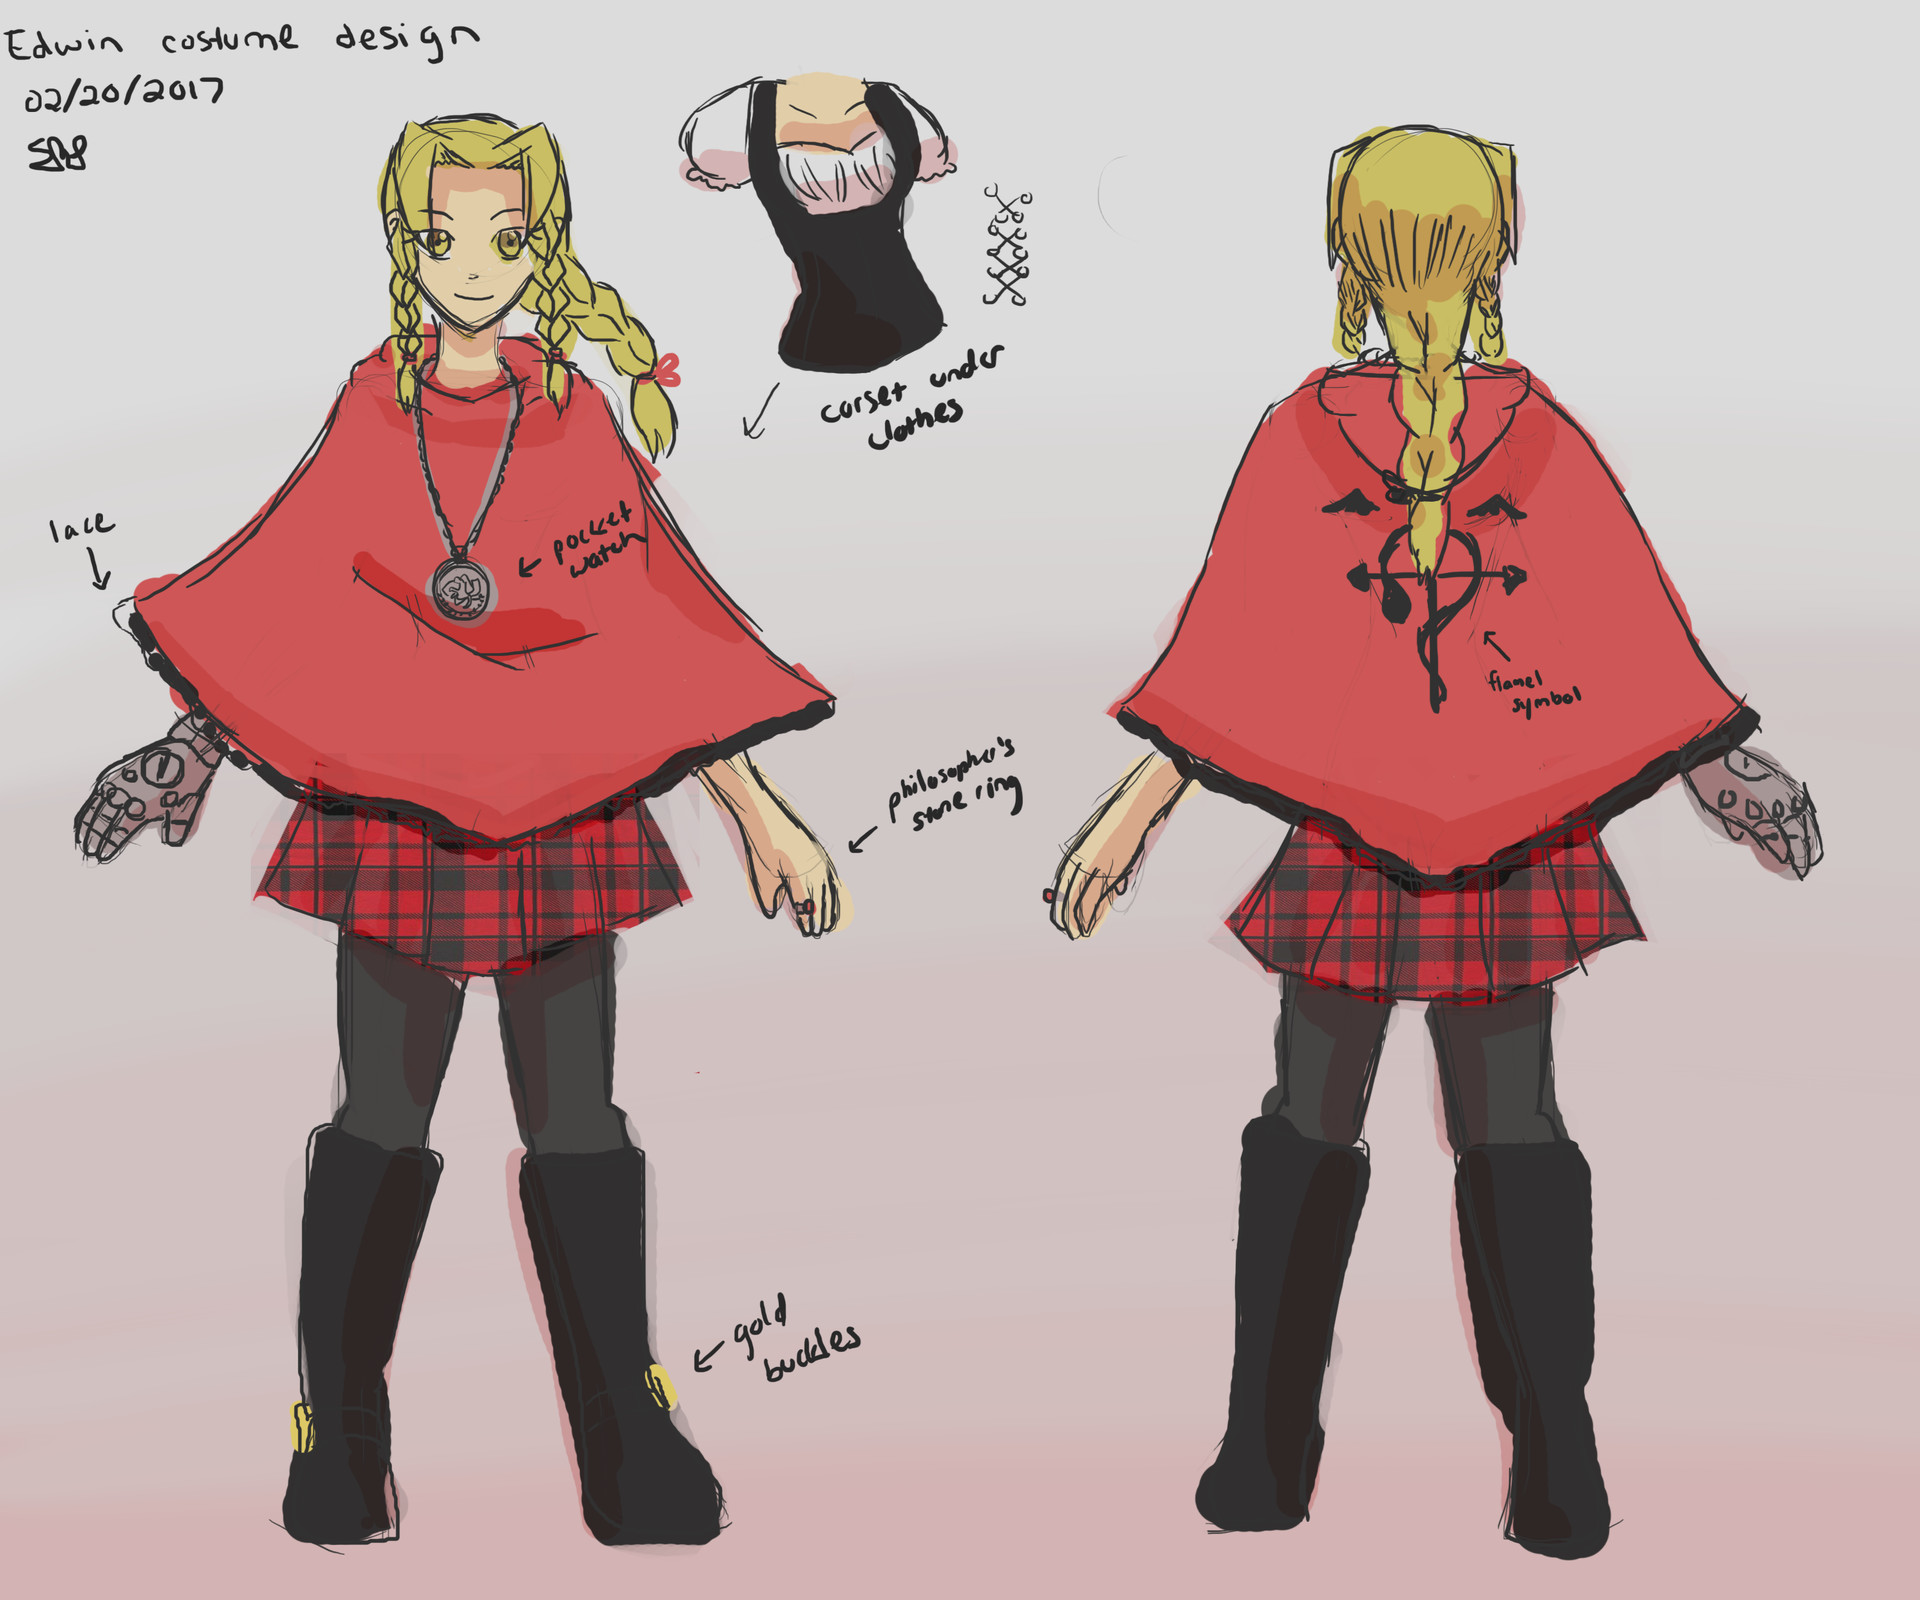 As a costume idea, I designed a female version of Edward Elric from Fullmet...